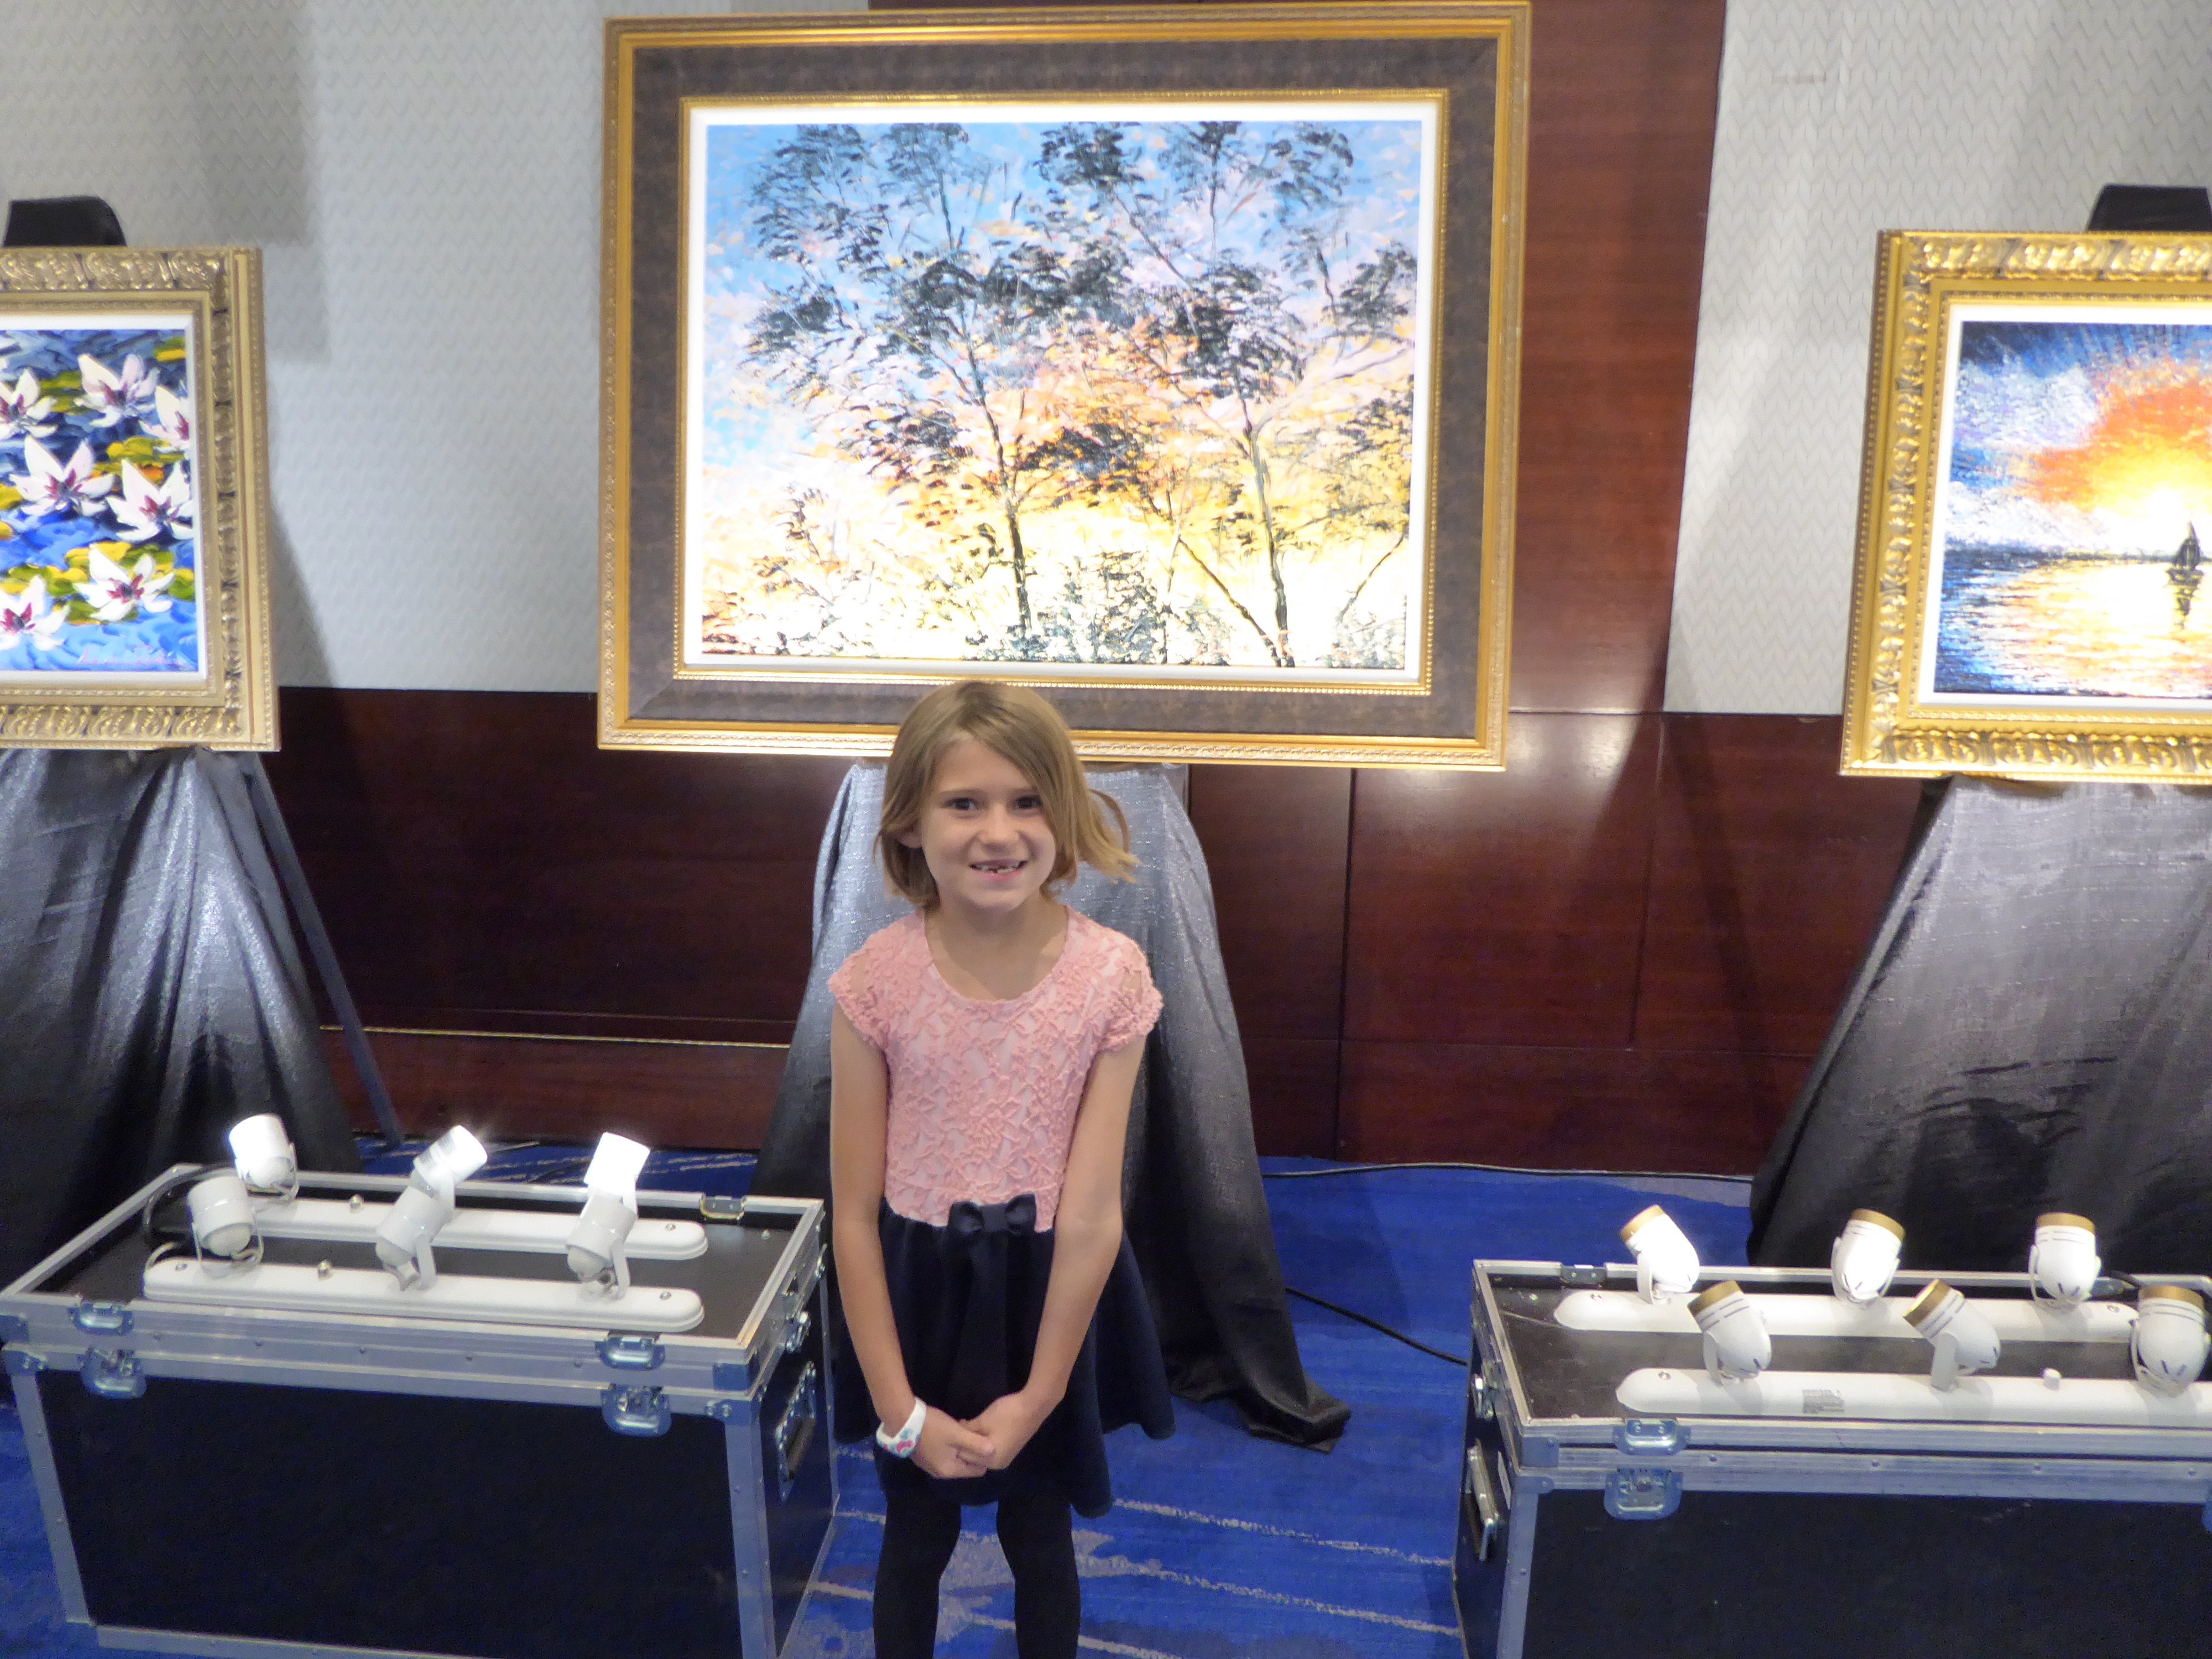 We Took Our Kids to a VIP Art Auction and Here’s What Happened